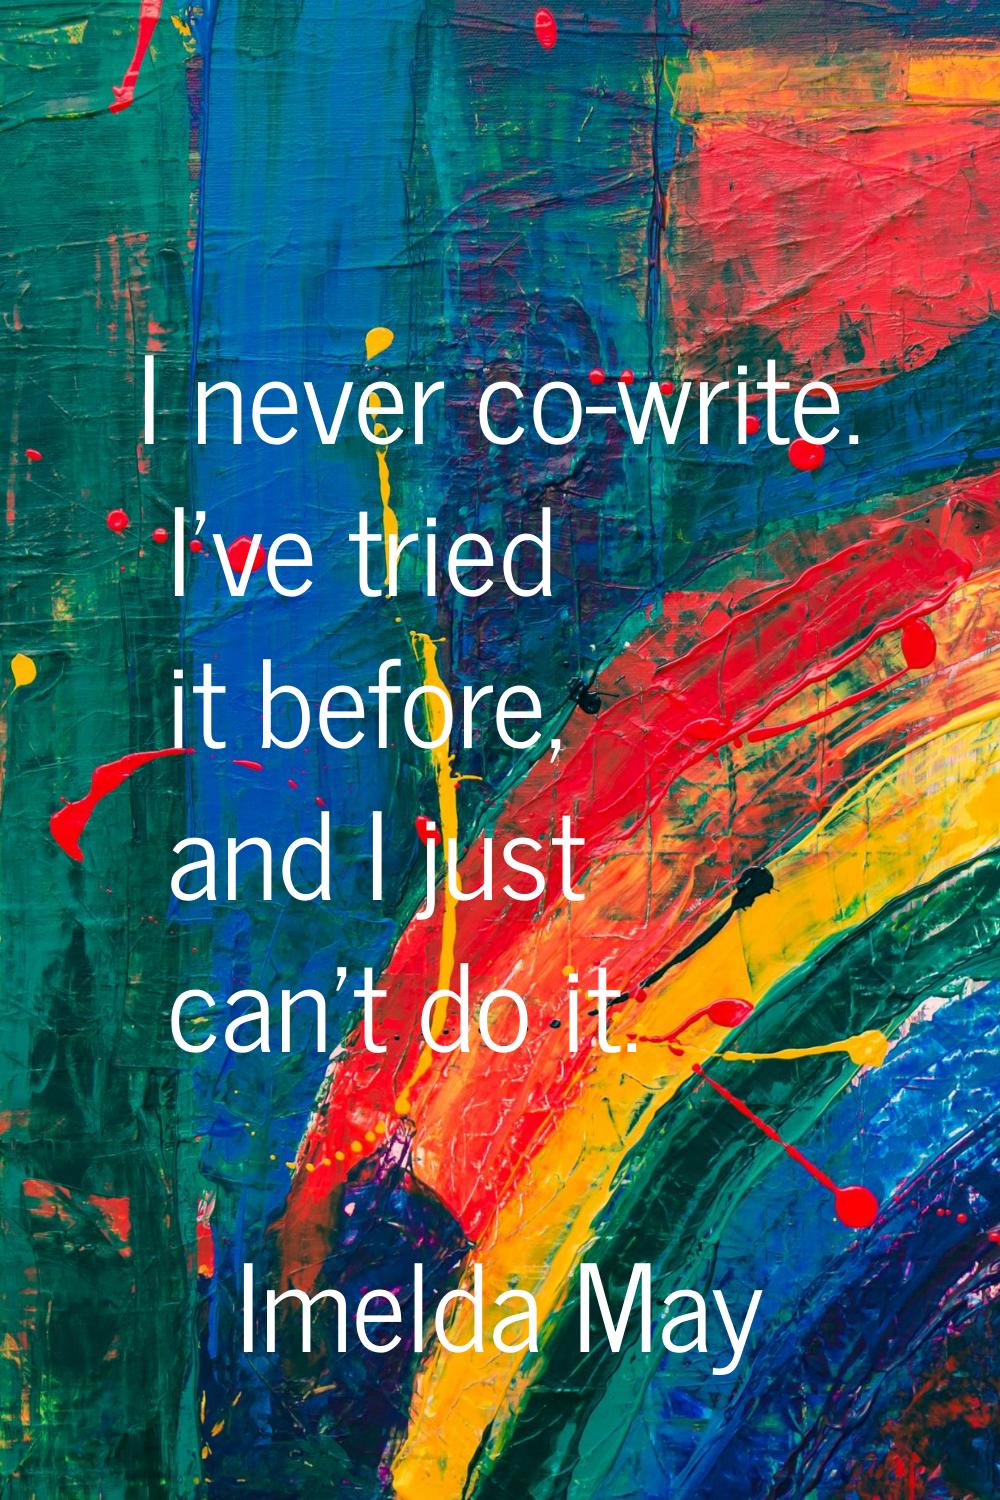 I never co-write. I've tried it before, and I just can't do it.